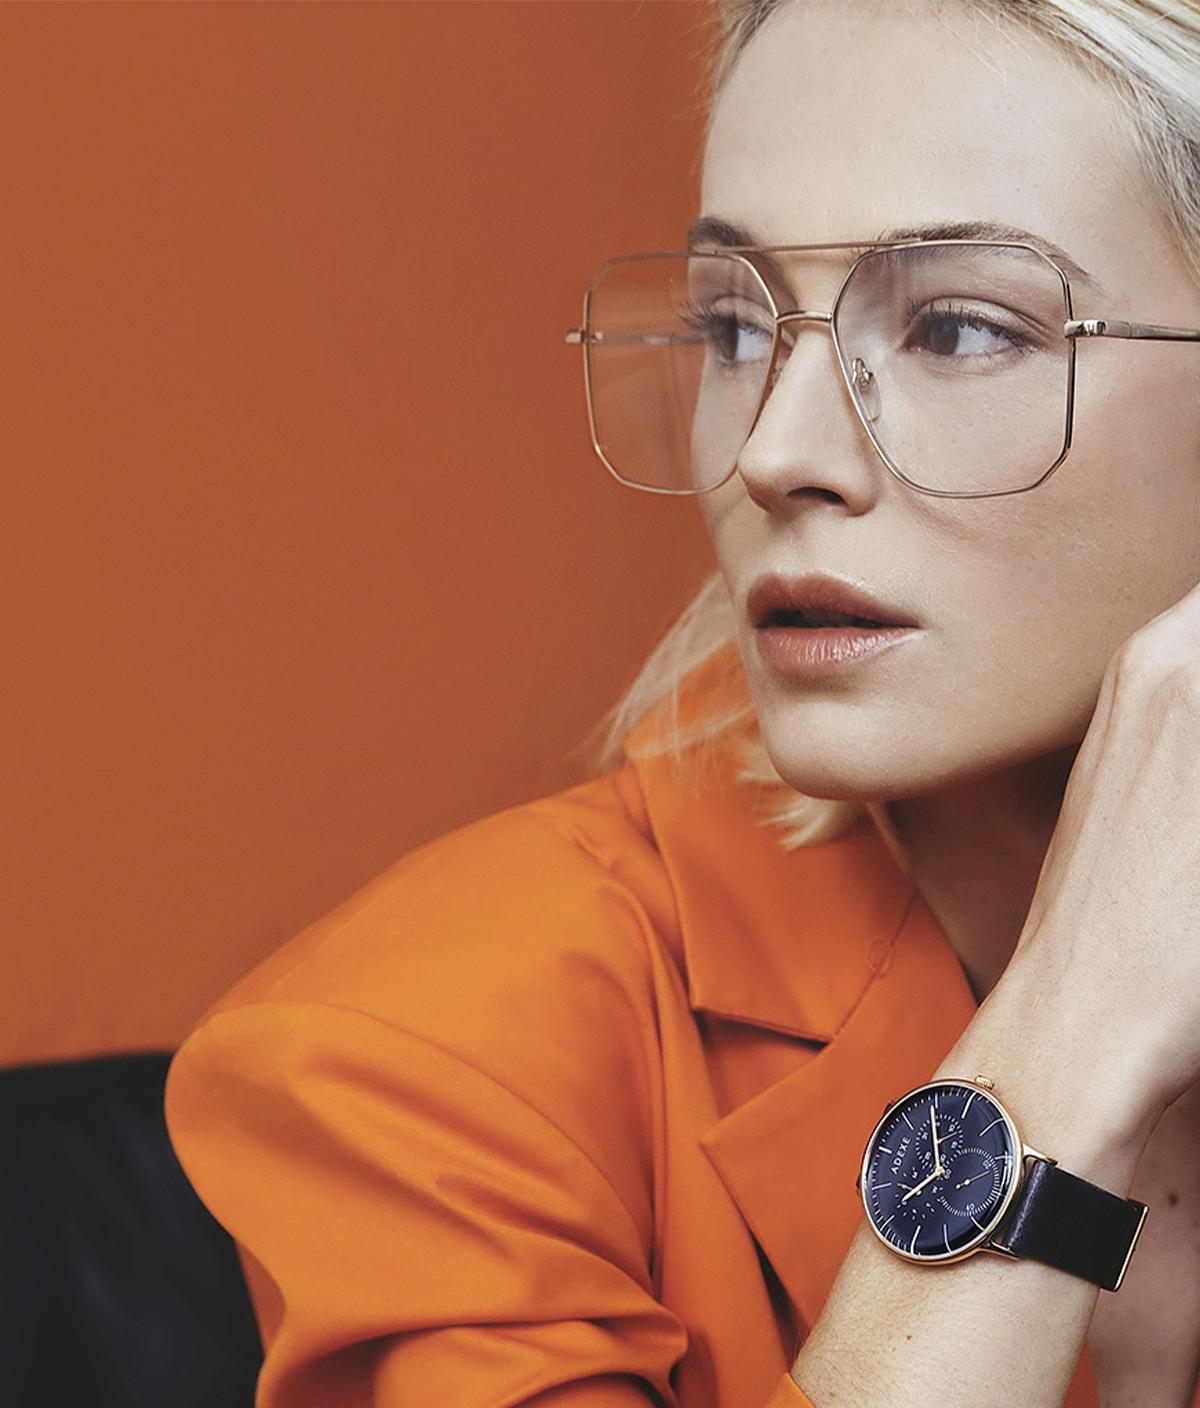 【THEY 】The Timeless Casual Business Watch 

We have specifically chosen the name THEY for this very first collection to identify a truly unisex product, which celebrates diversity and inclusion every day and everywhere.

Official website packaging: